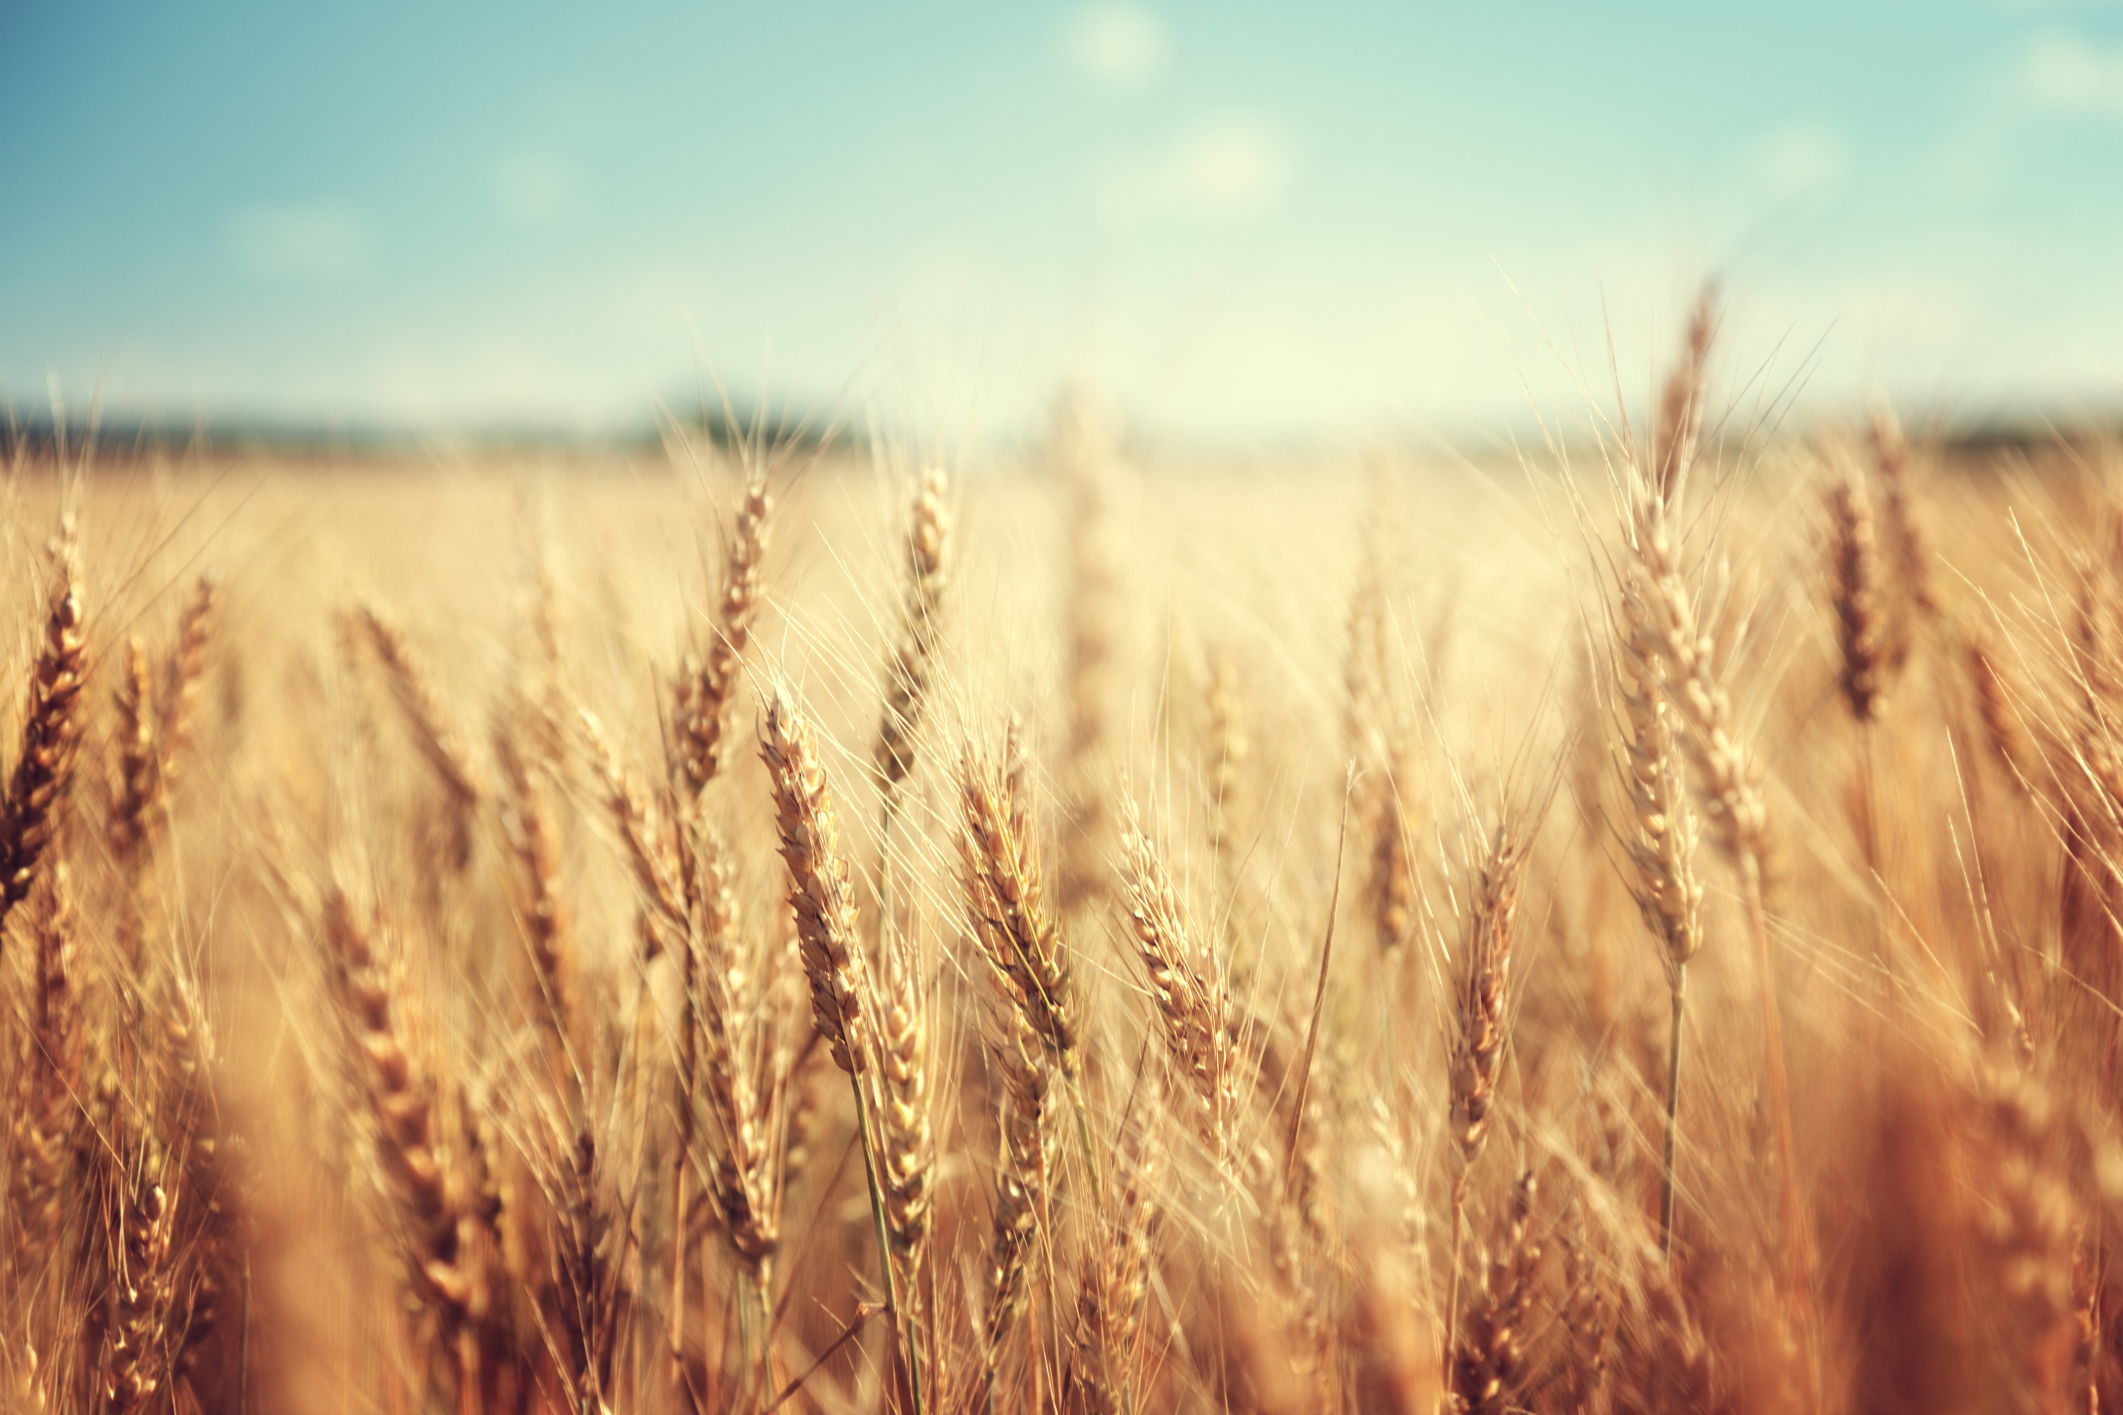 U.S. challenges Indian market support for wheat and rice | Farm Futures